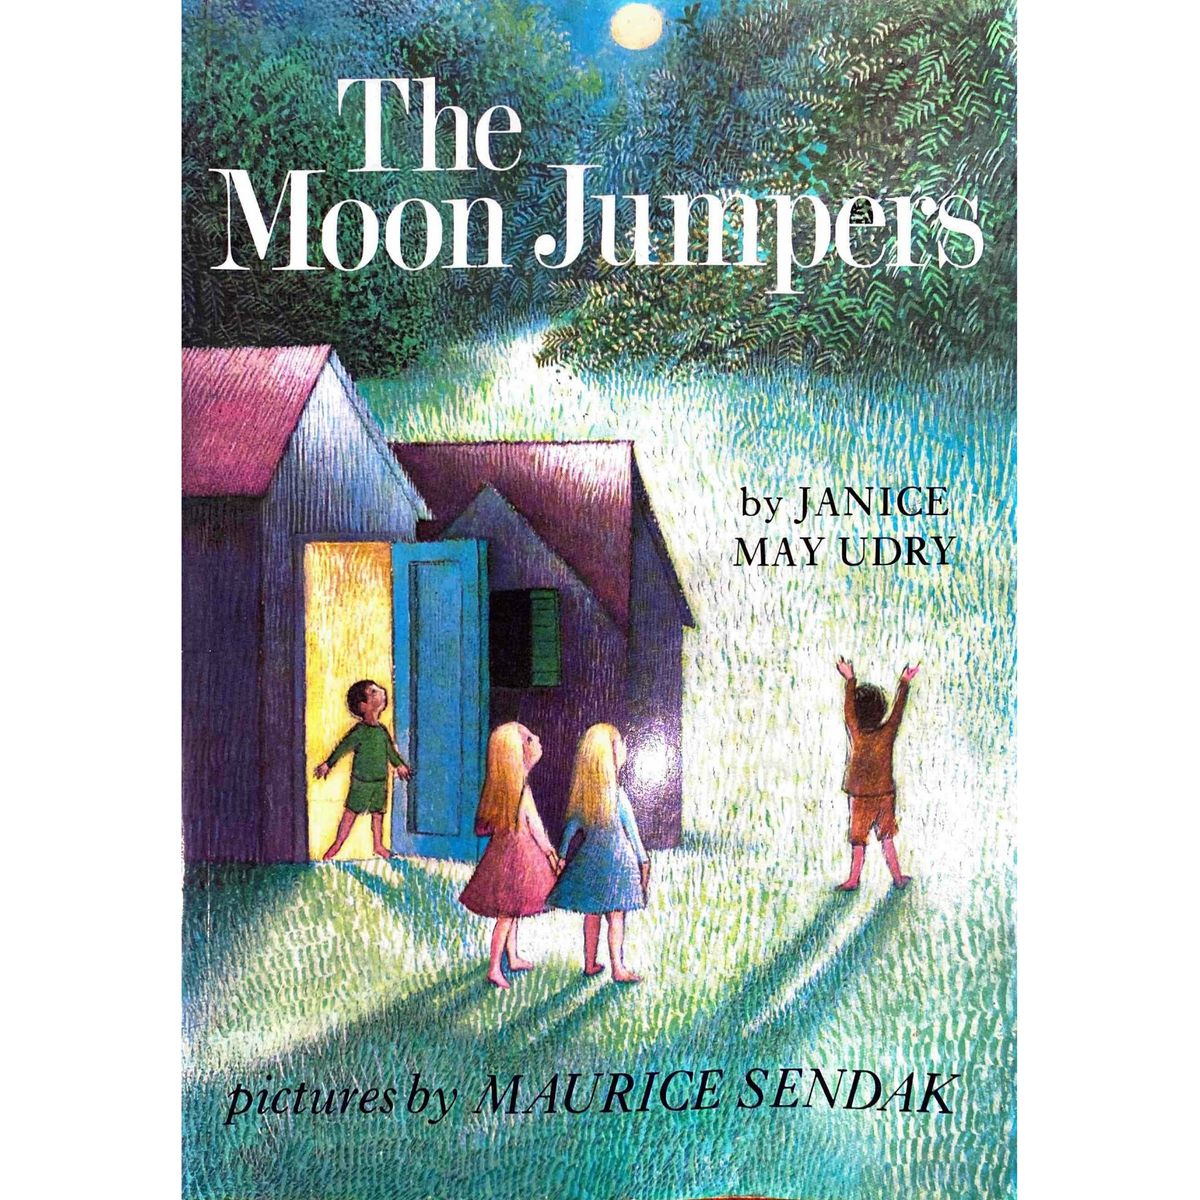 ISBN: 9780006640790 / 0006640796 - The Moon Jumpers by Janice May Udry [1992]